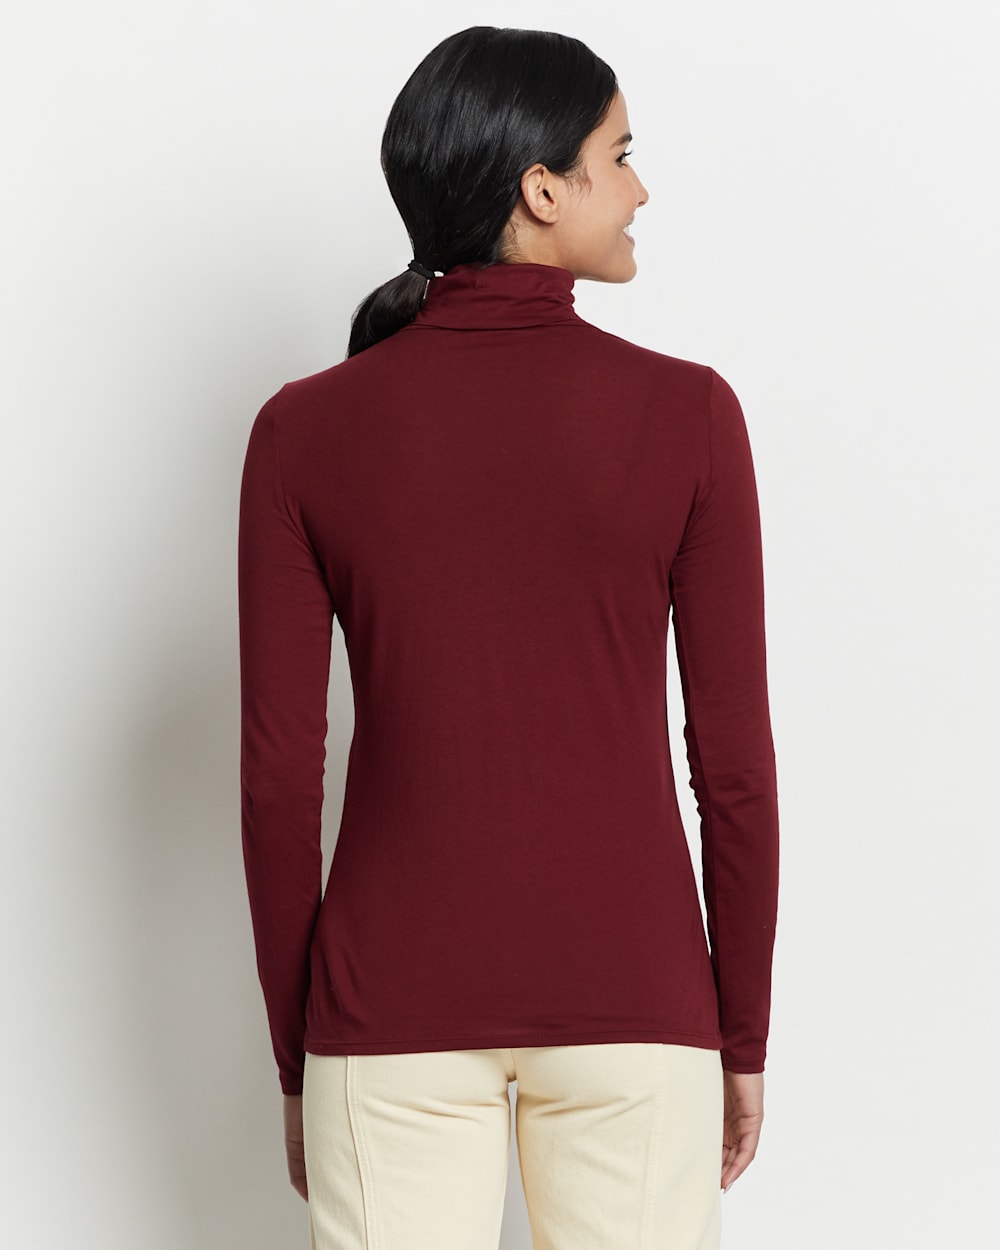 ALTERNATE VIEW OF LONG-SLEEVE TURTLENECK JERSEY TEE IN CABERNET image number 3